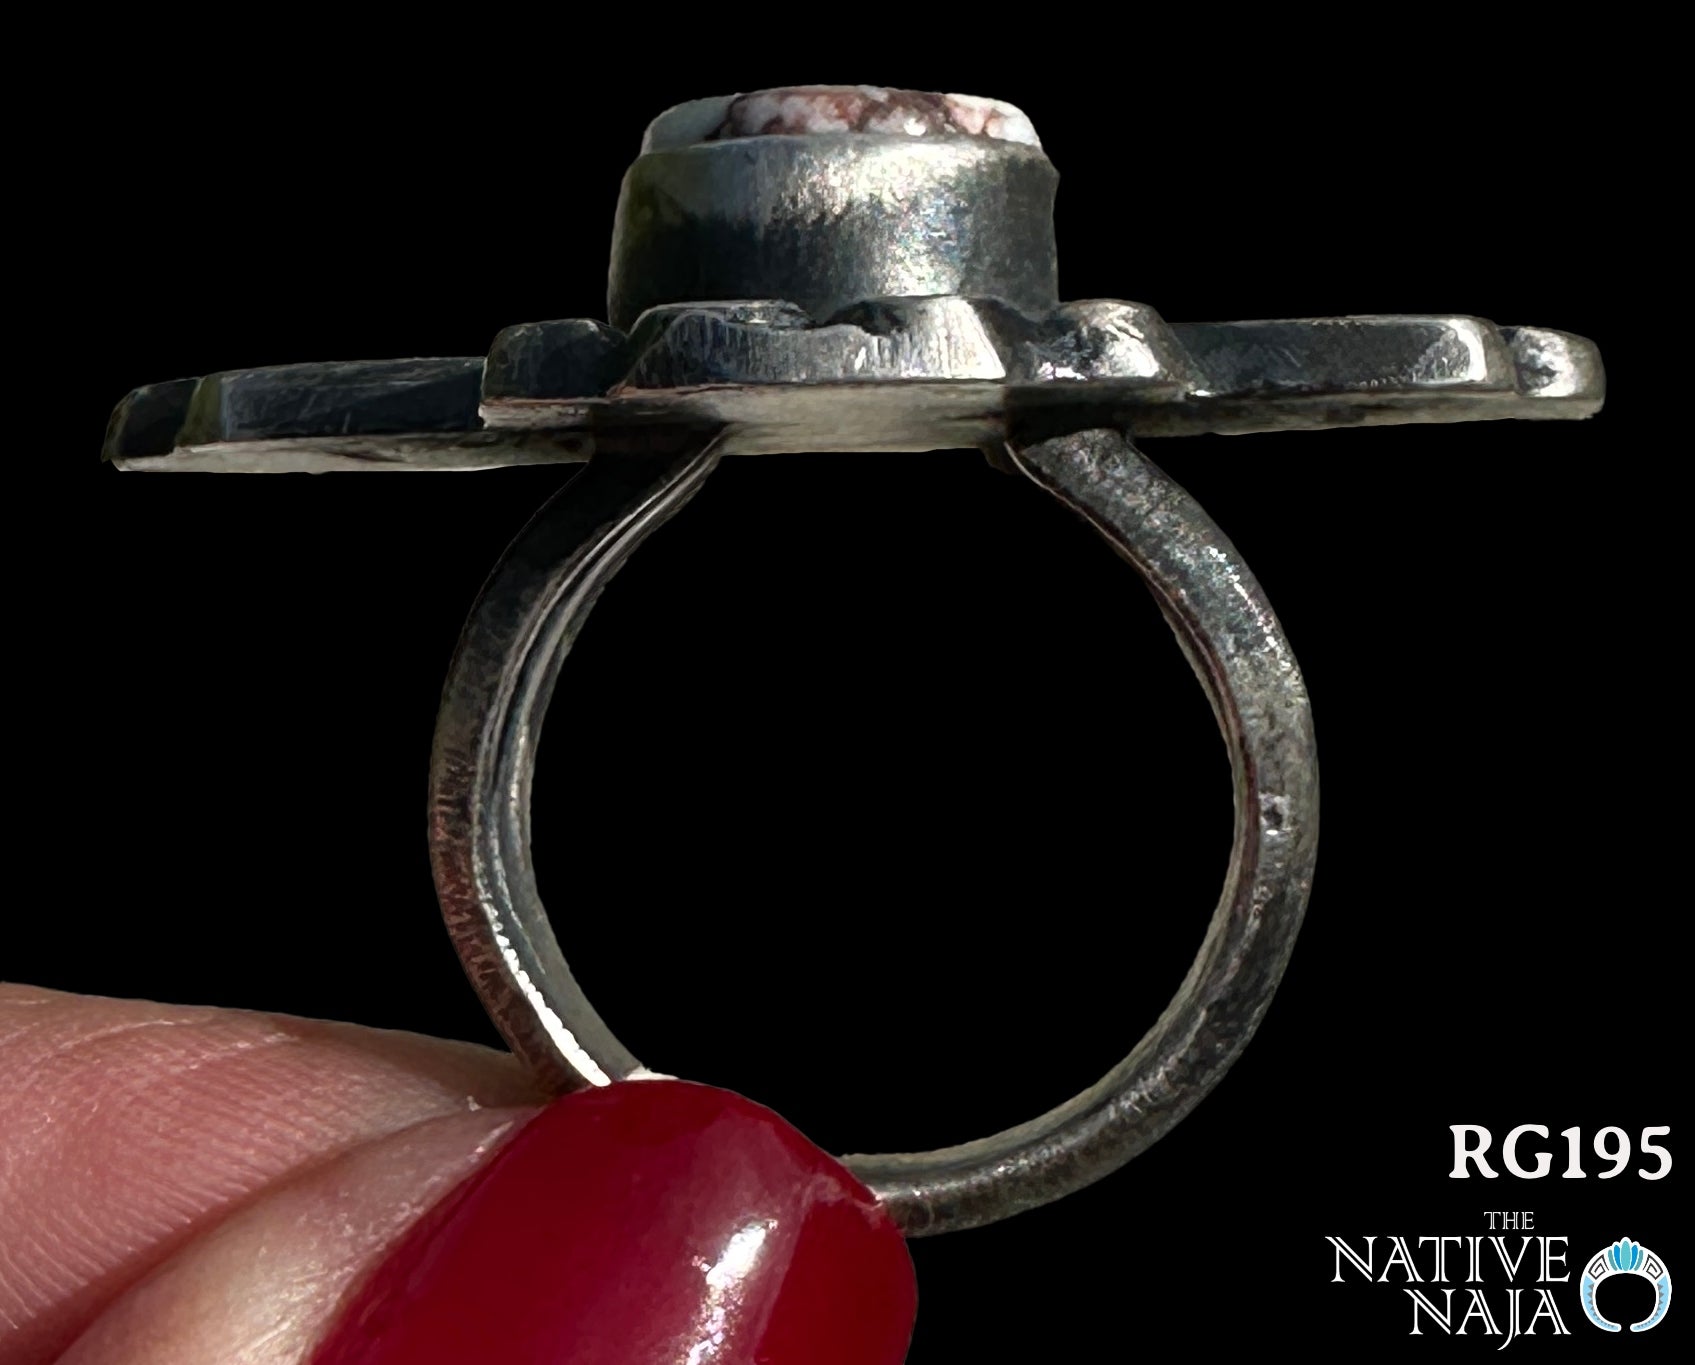 Chimney Butte Navajo Zia Wild Horse & Sterling Silver Ring Size 7 1/4 RG195